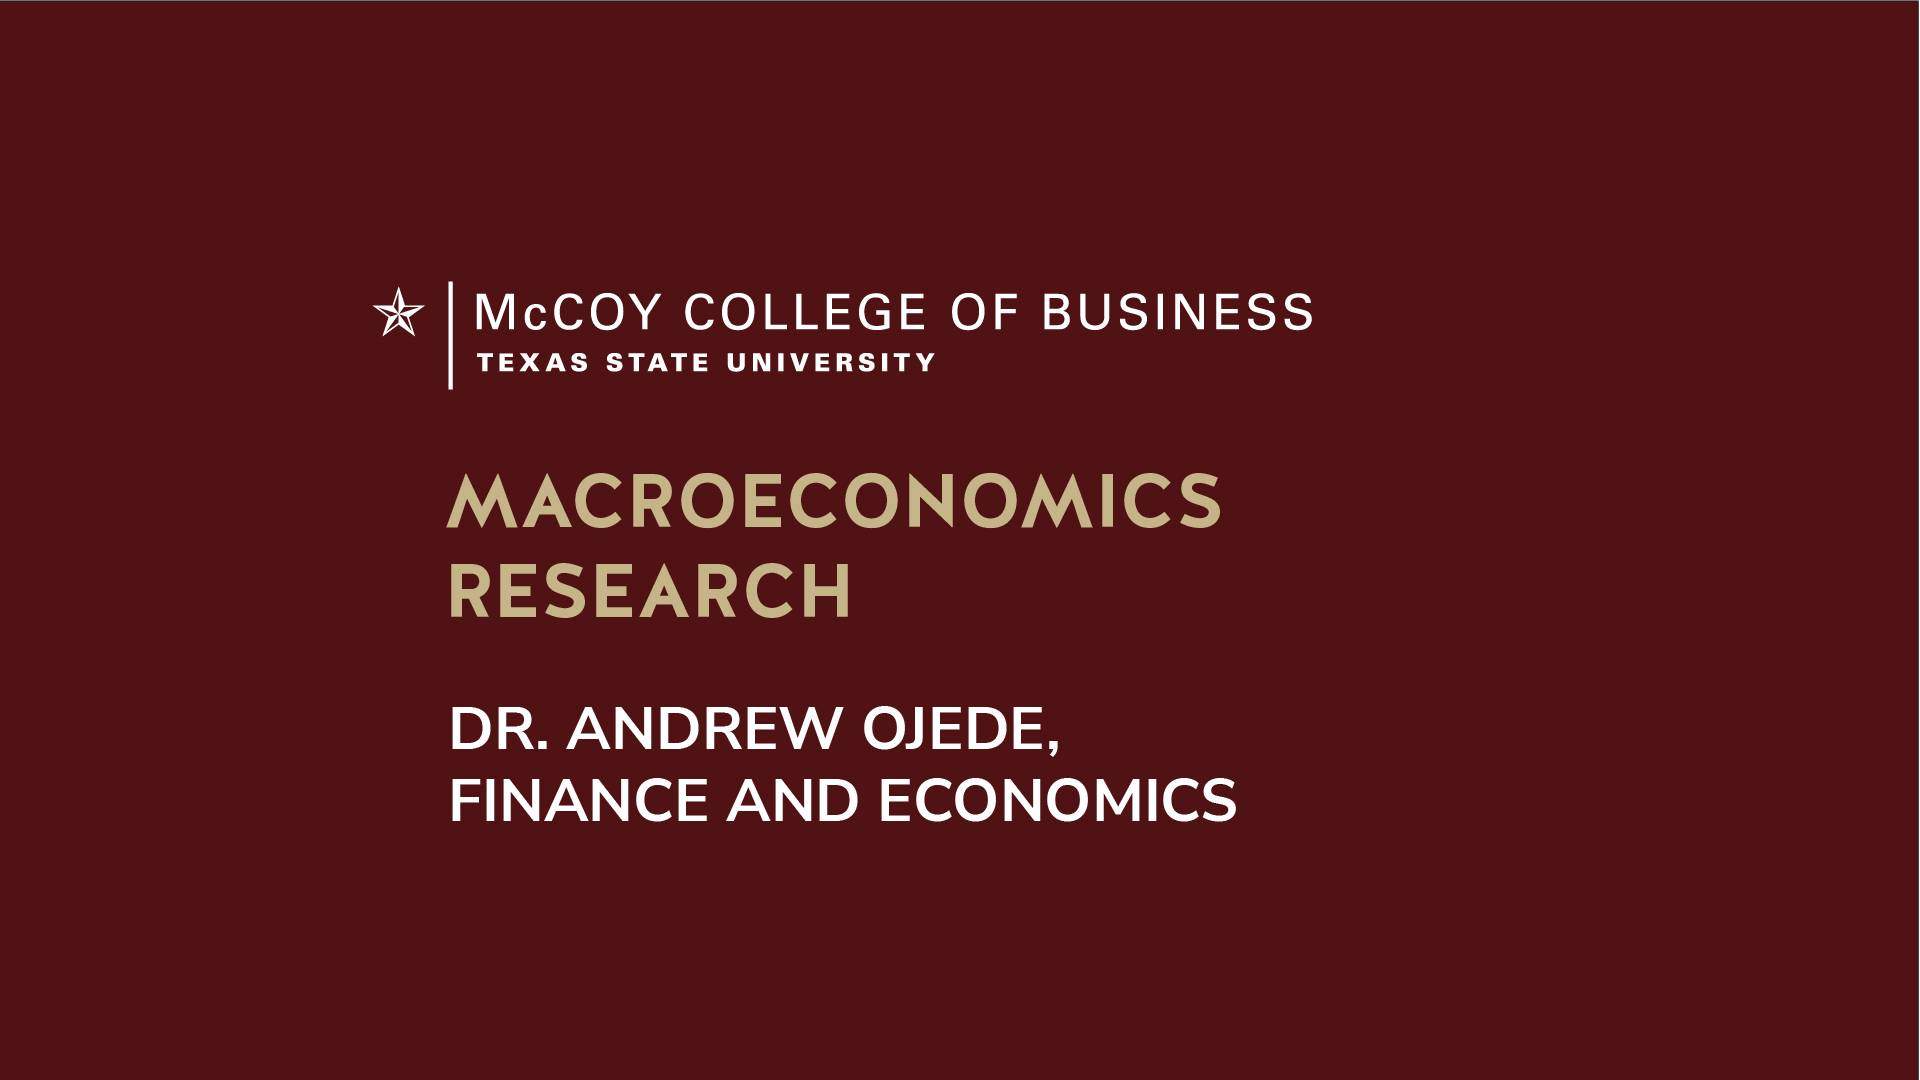 Dr. Andrew Ojede discusses Macroeconomics Research